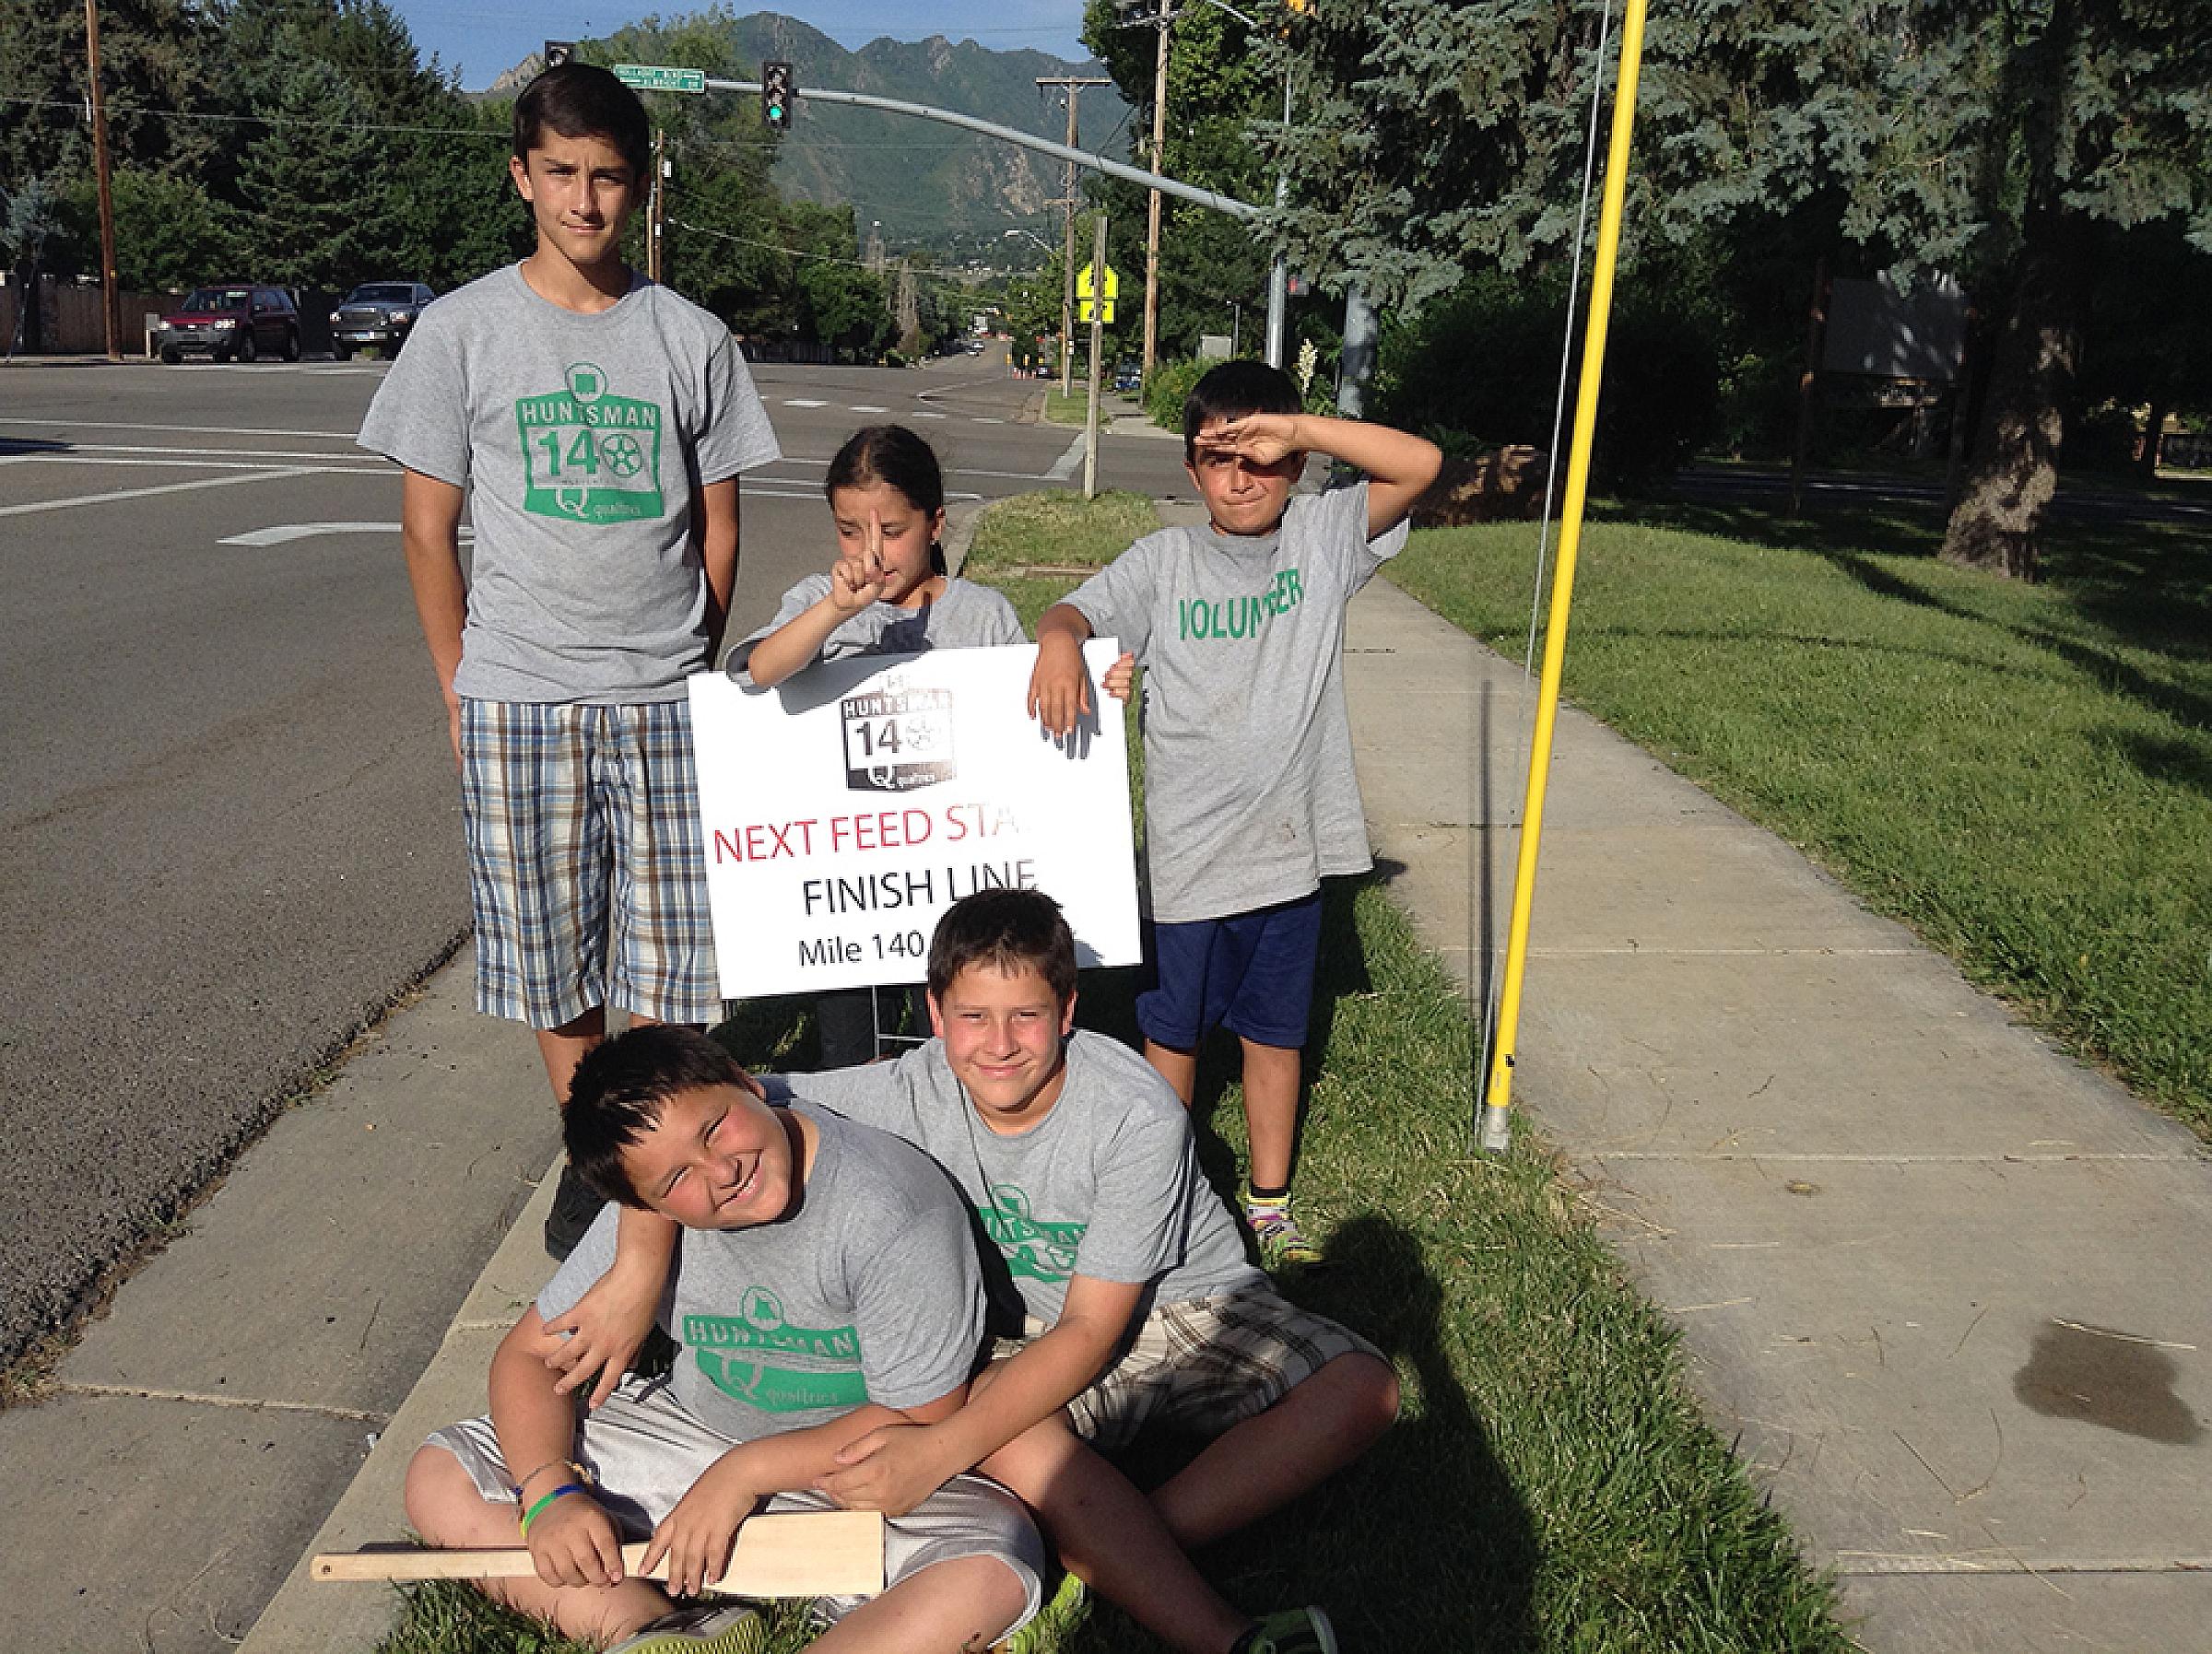 Arauzo kids hold sign at sporting event